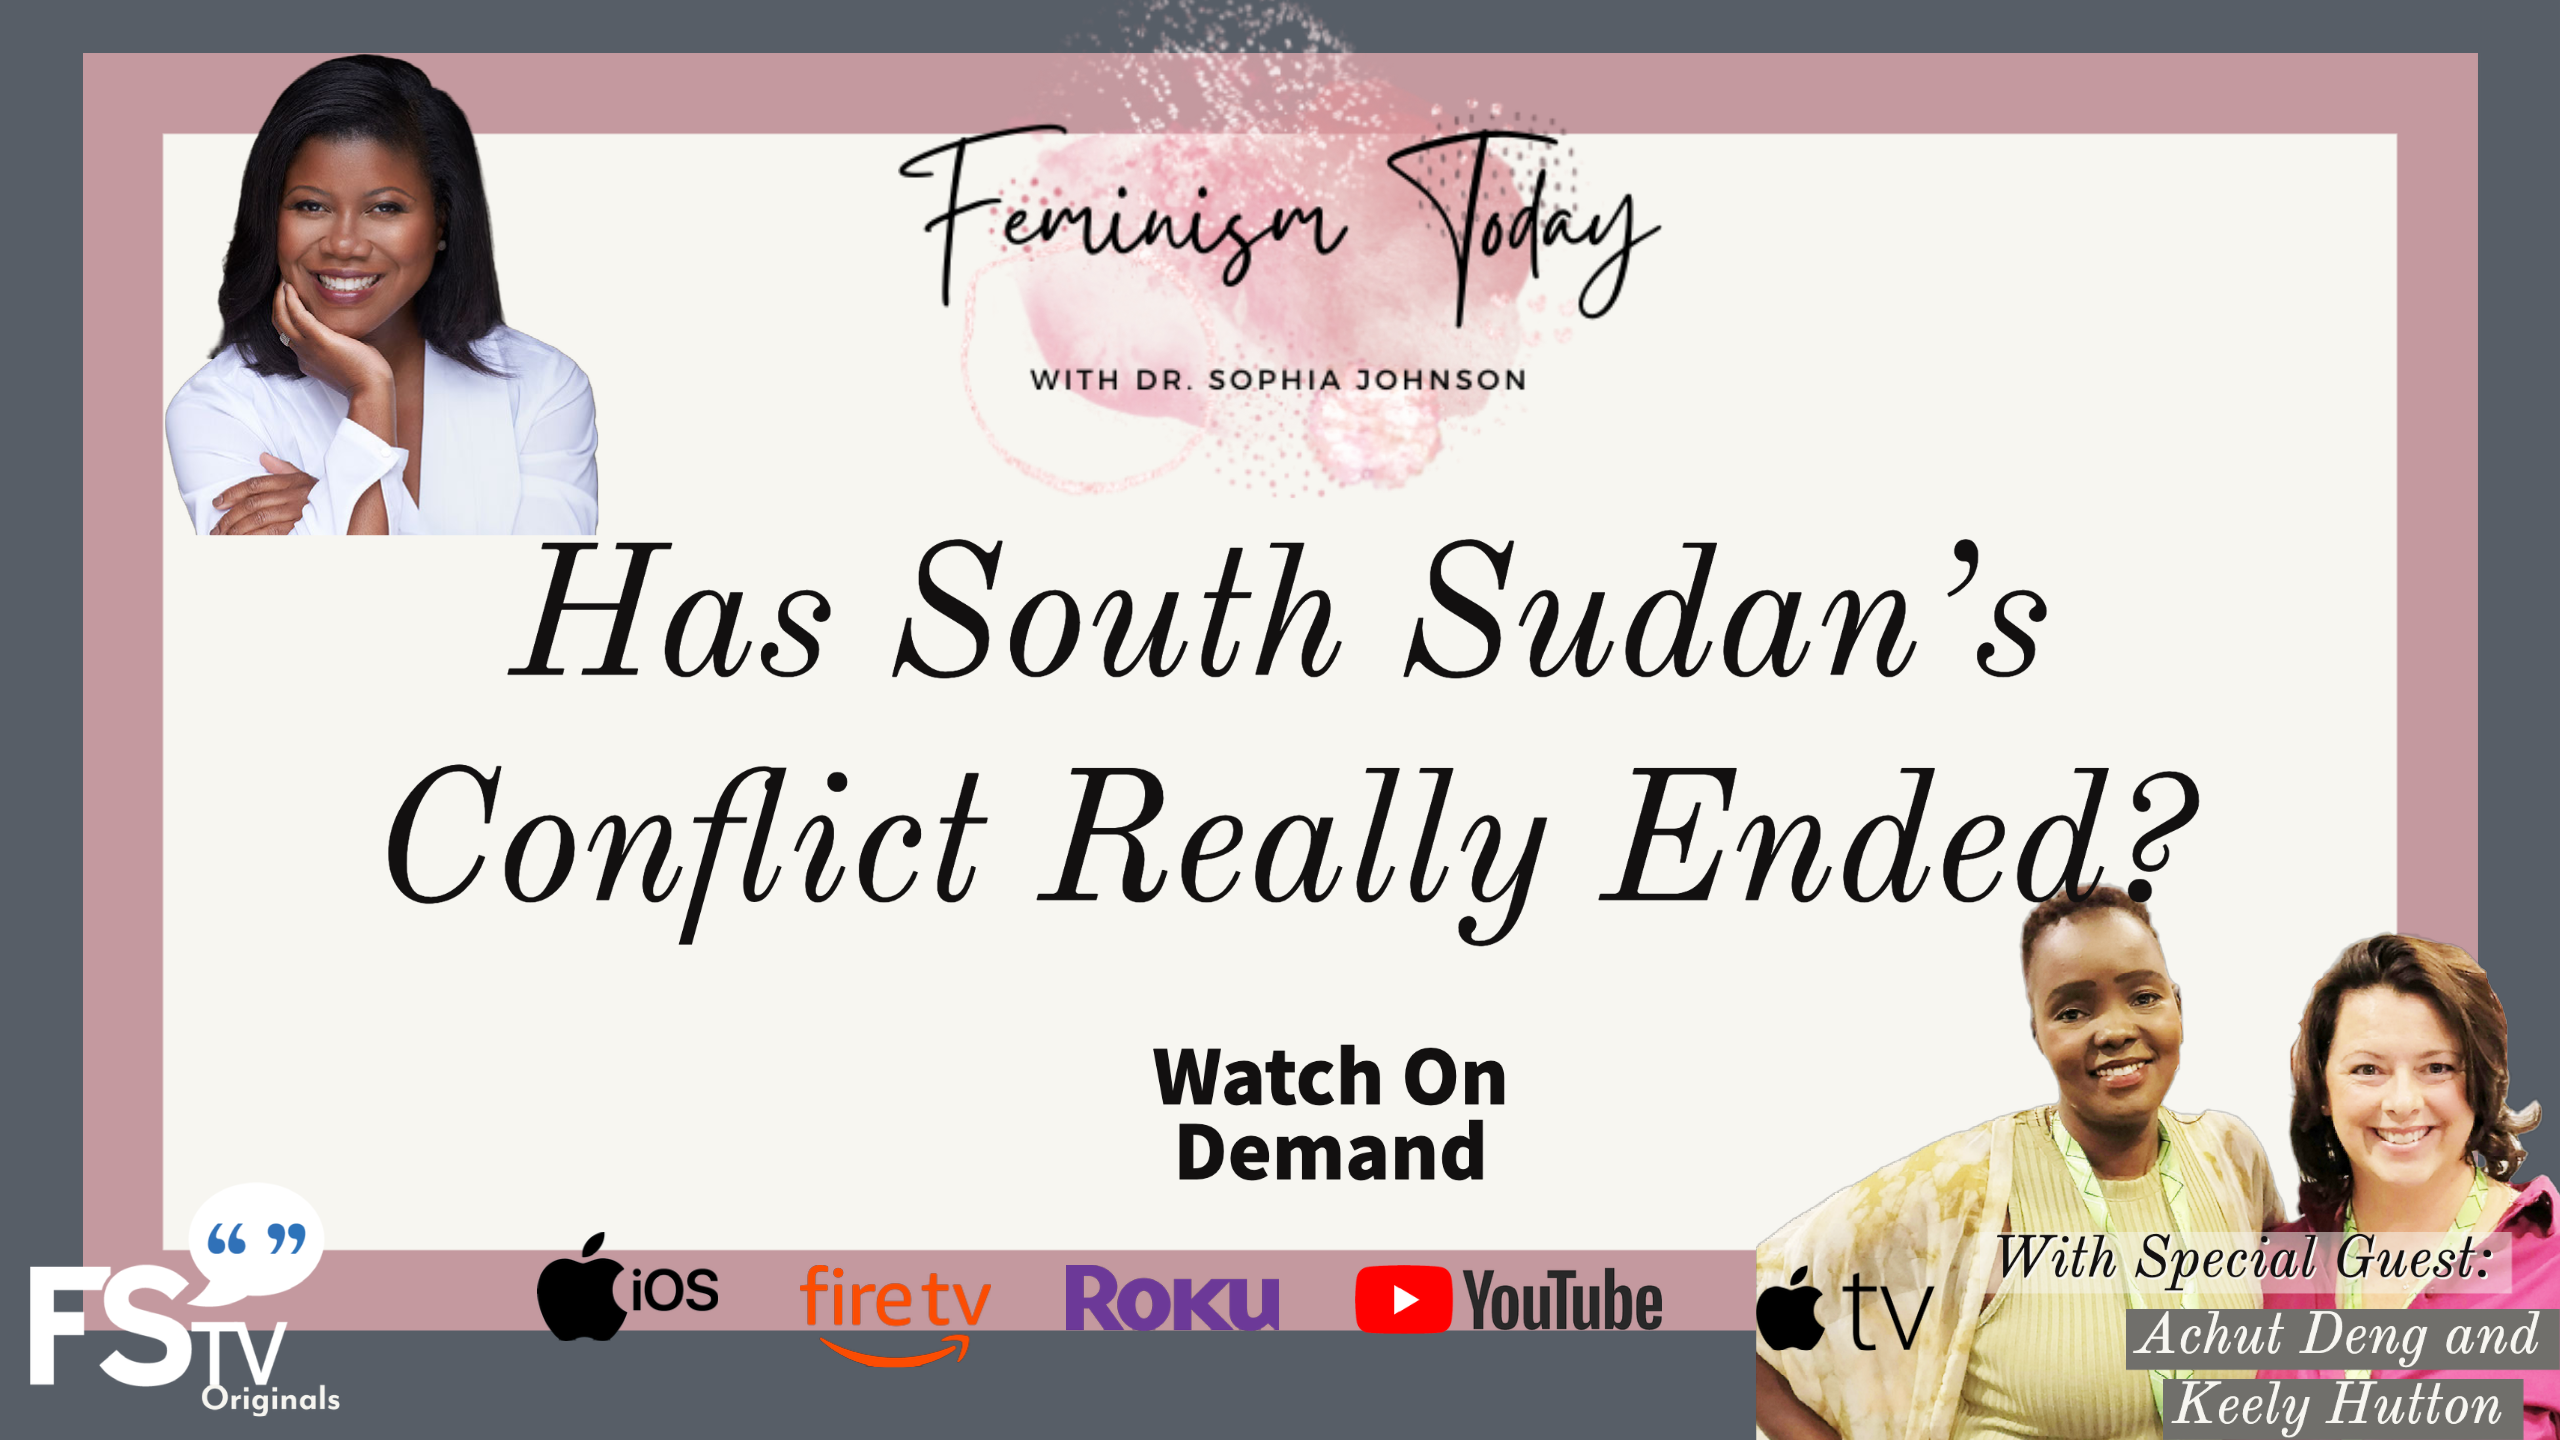 This Week On #FeminismToday: Has South Sudan's Conflict Really Ended?